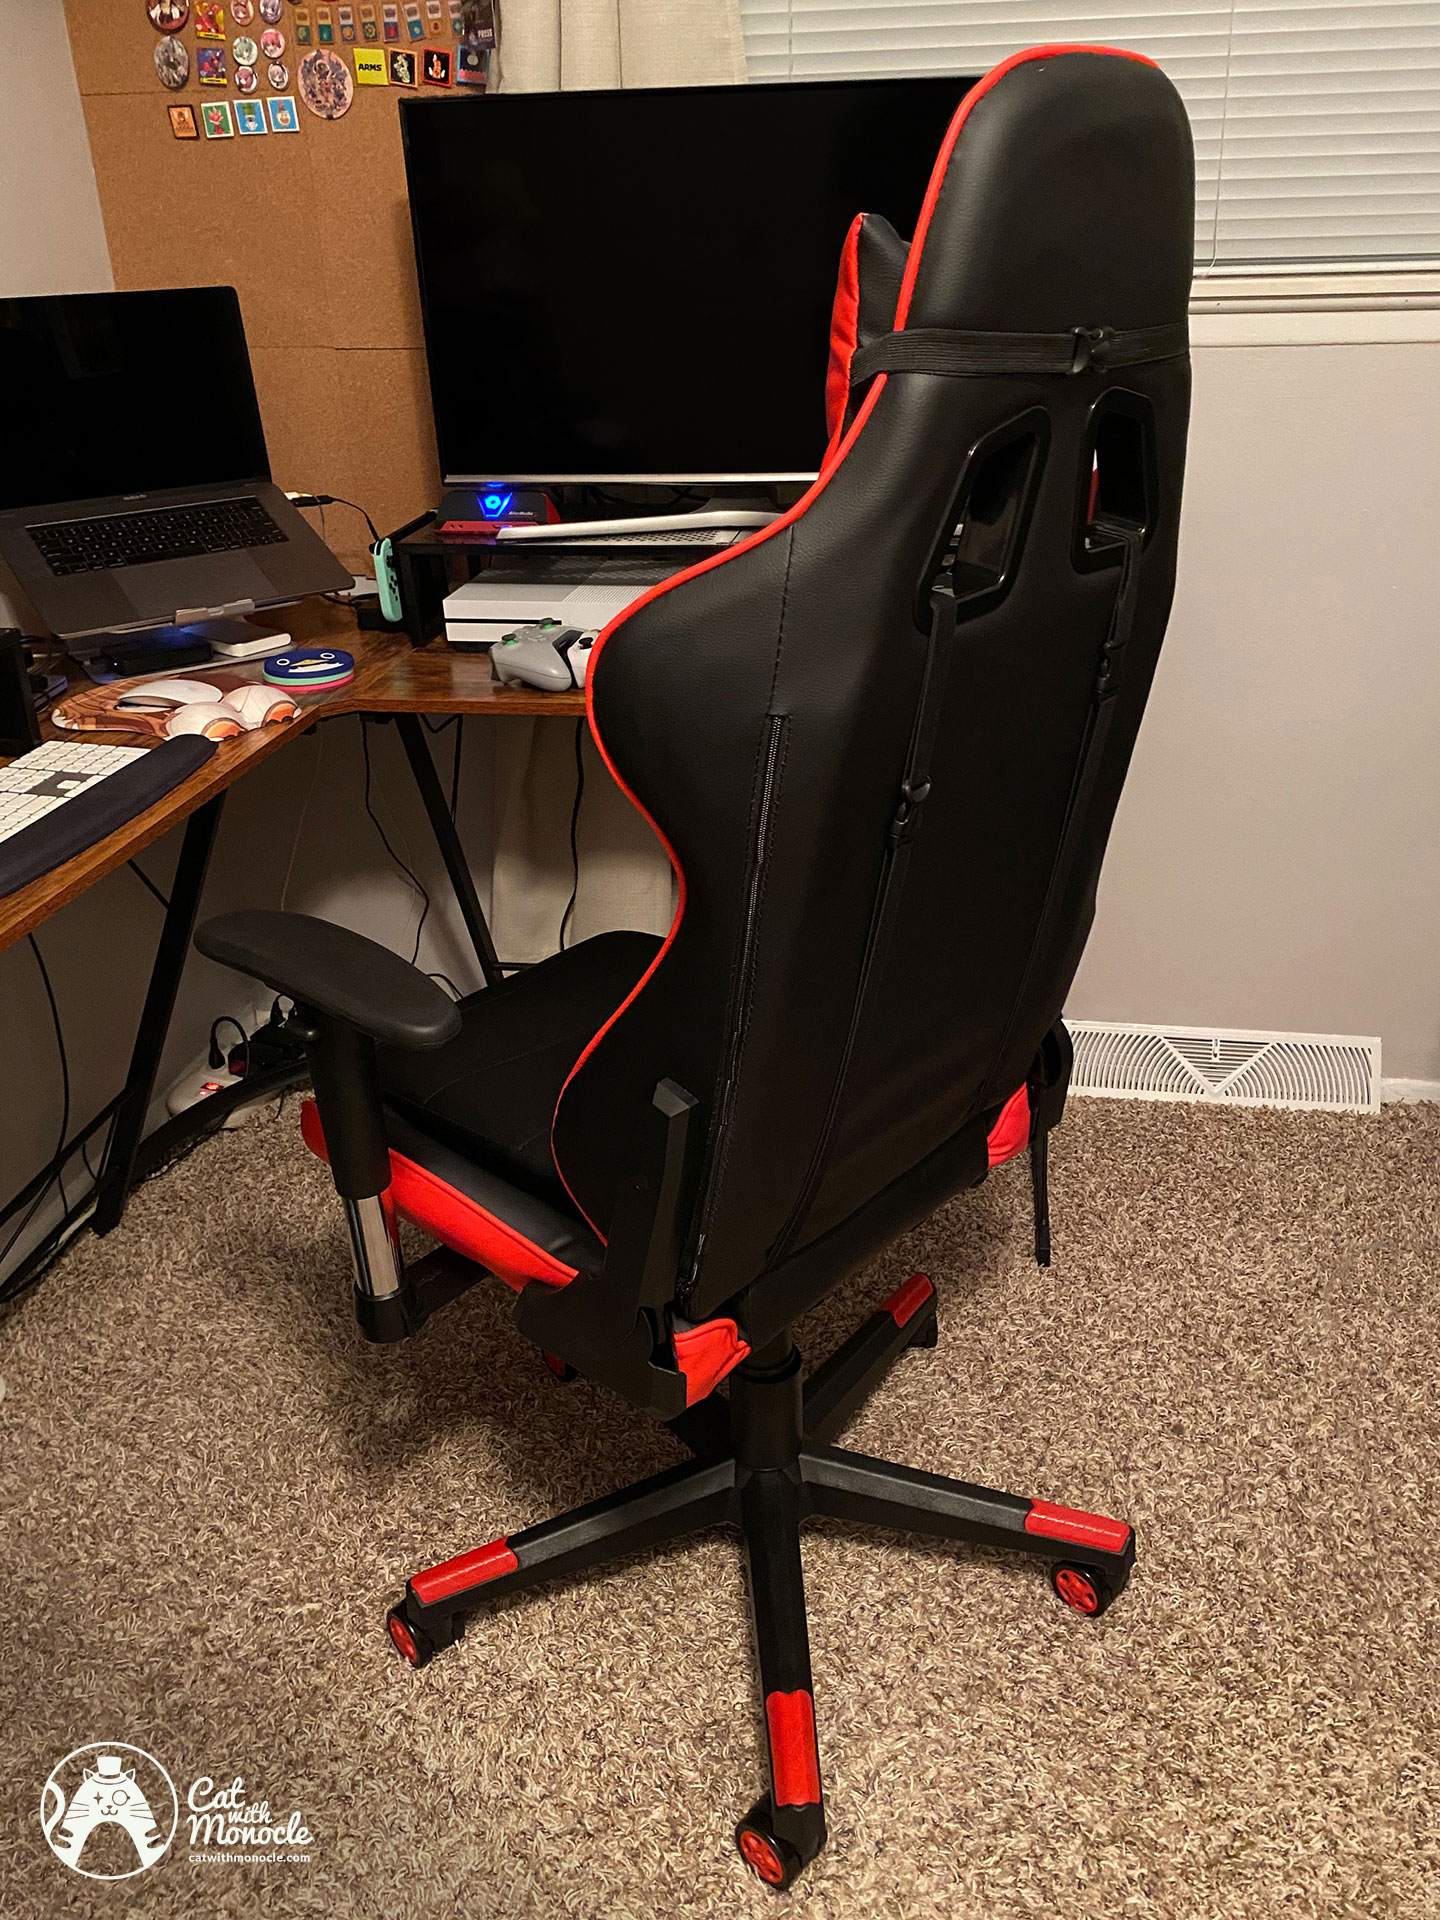 GTRacing Pro Series Chair (Review) - Cat with Monocle